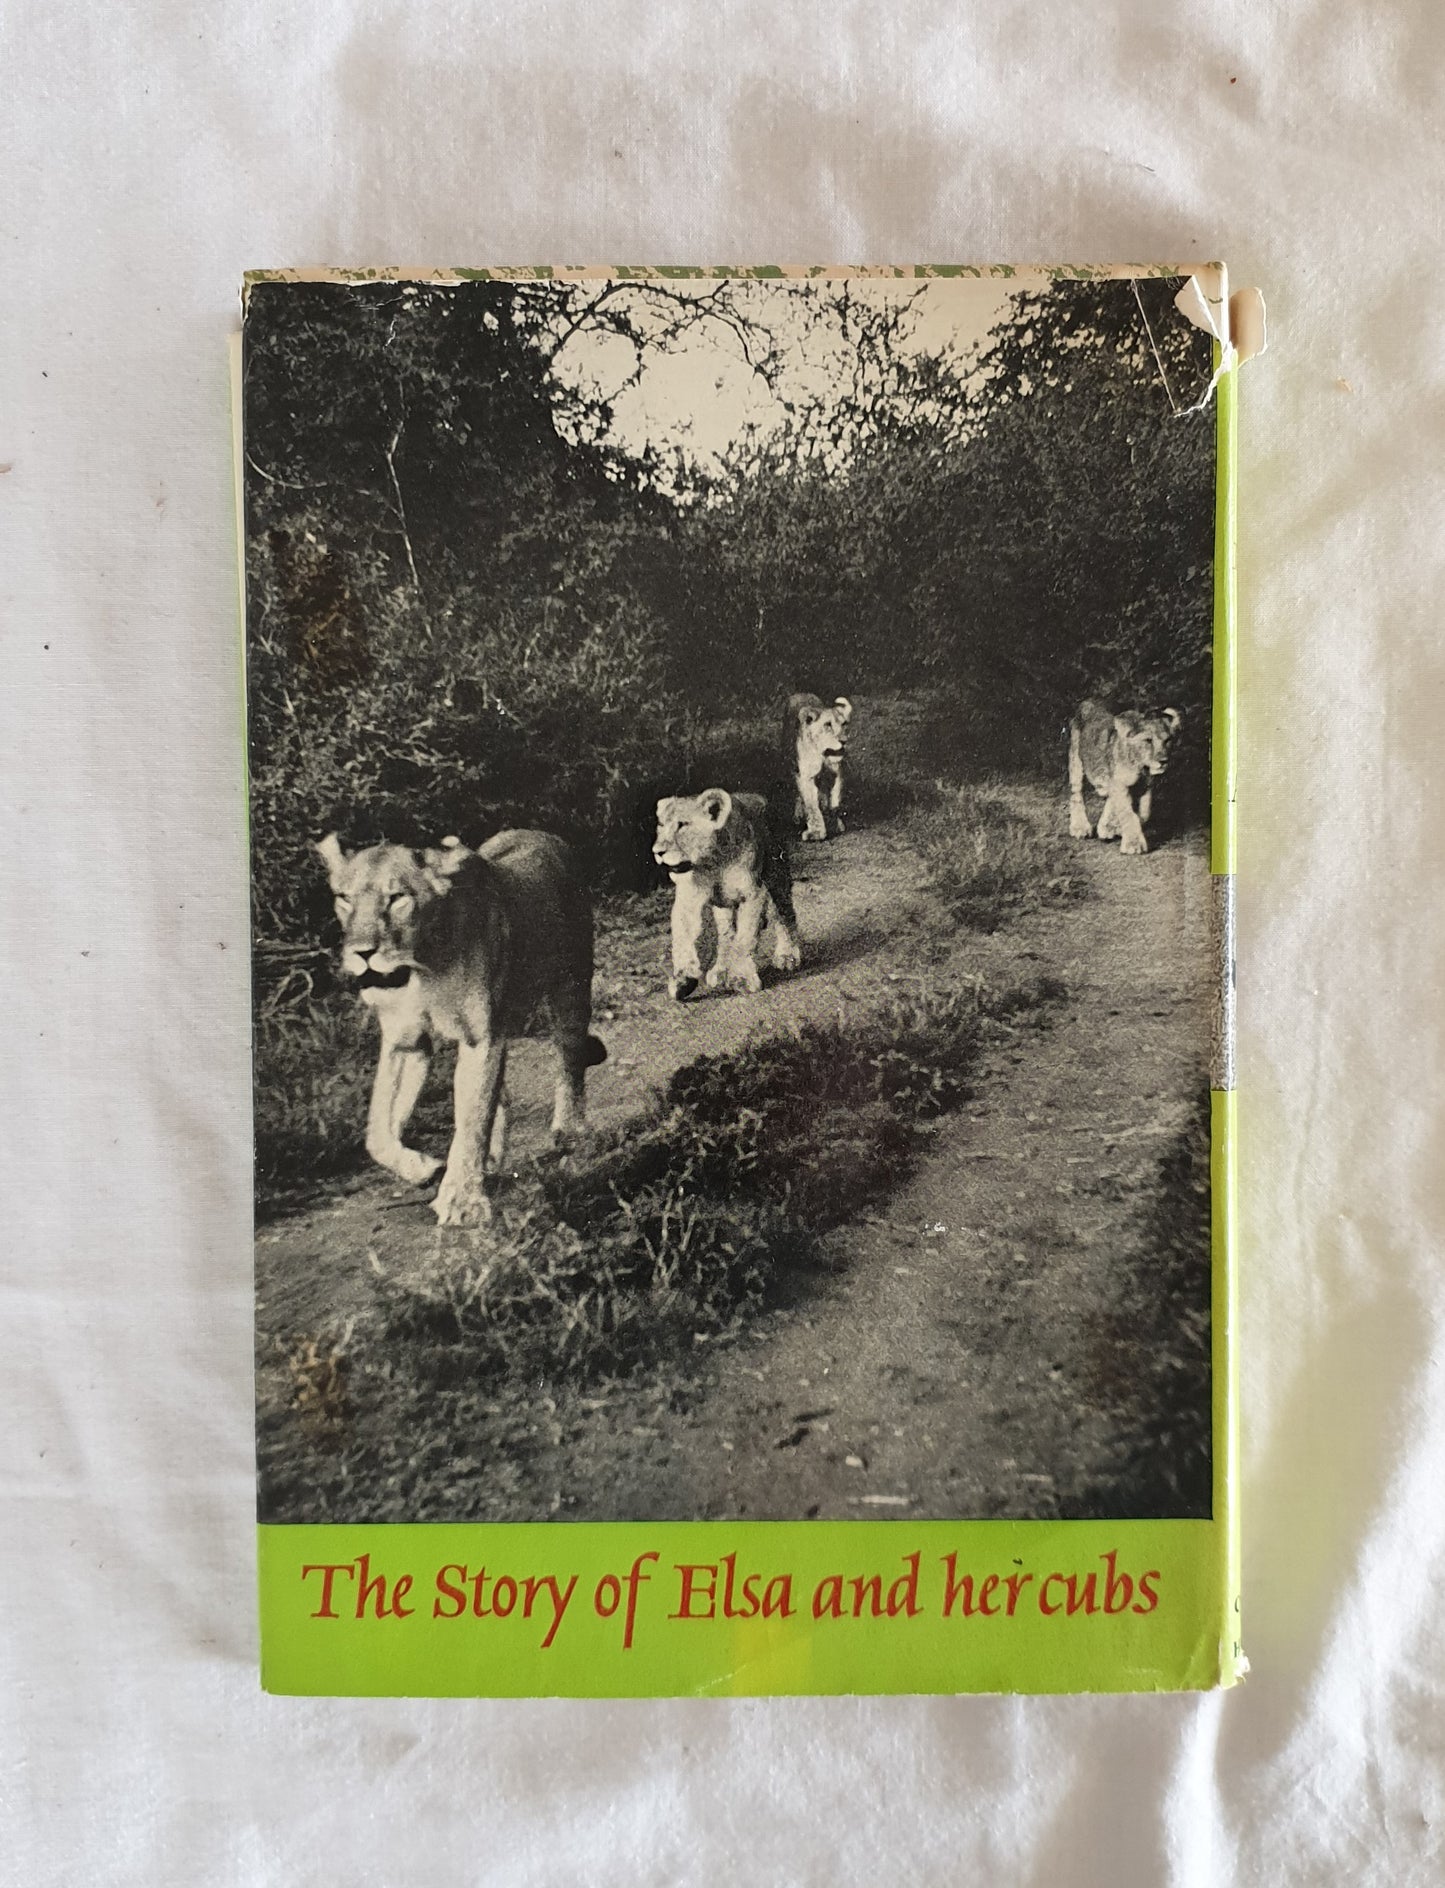 Living Free: The Story of Elsa and Her Cubs by Joy Adamson